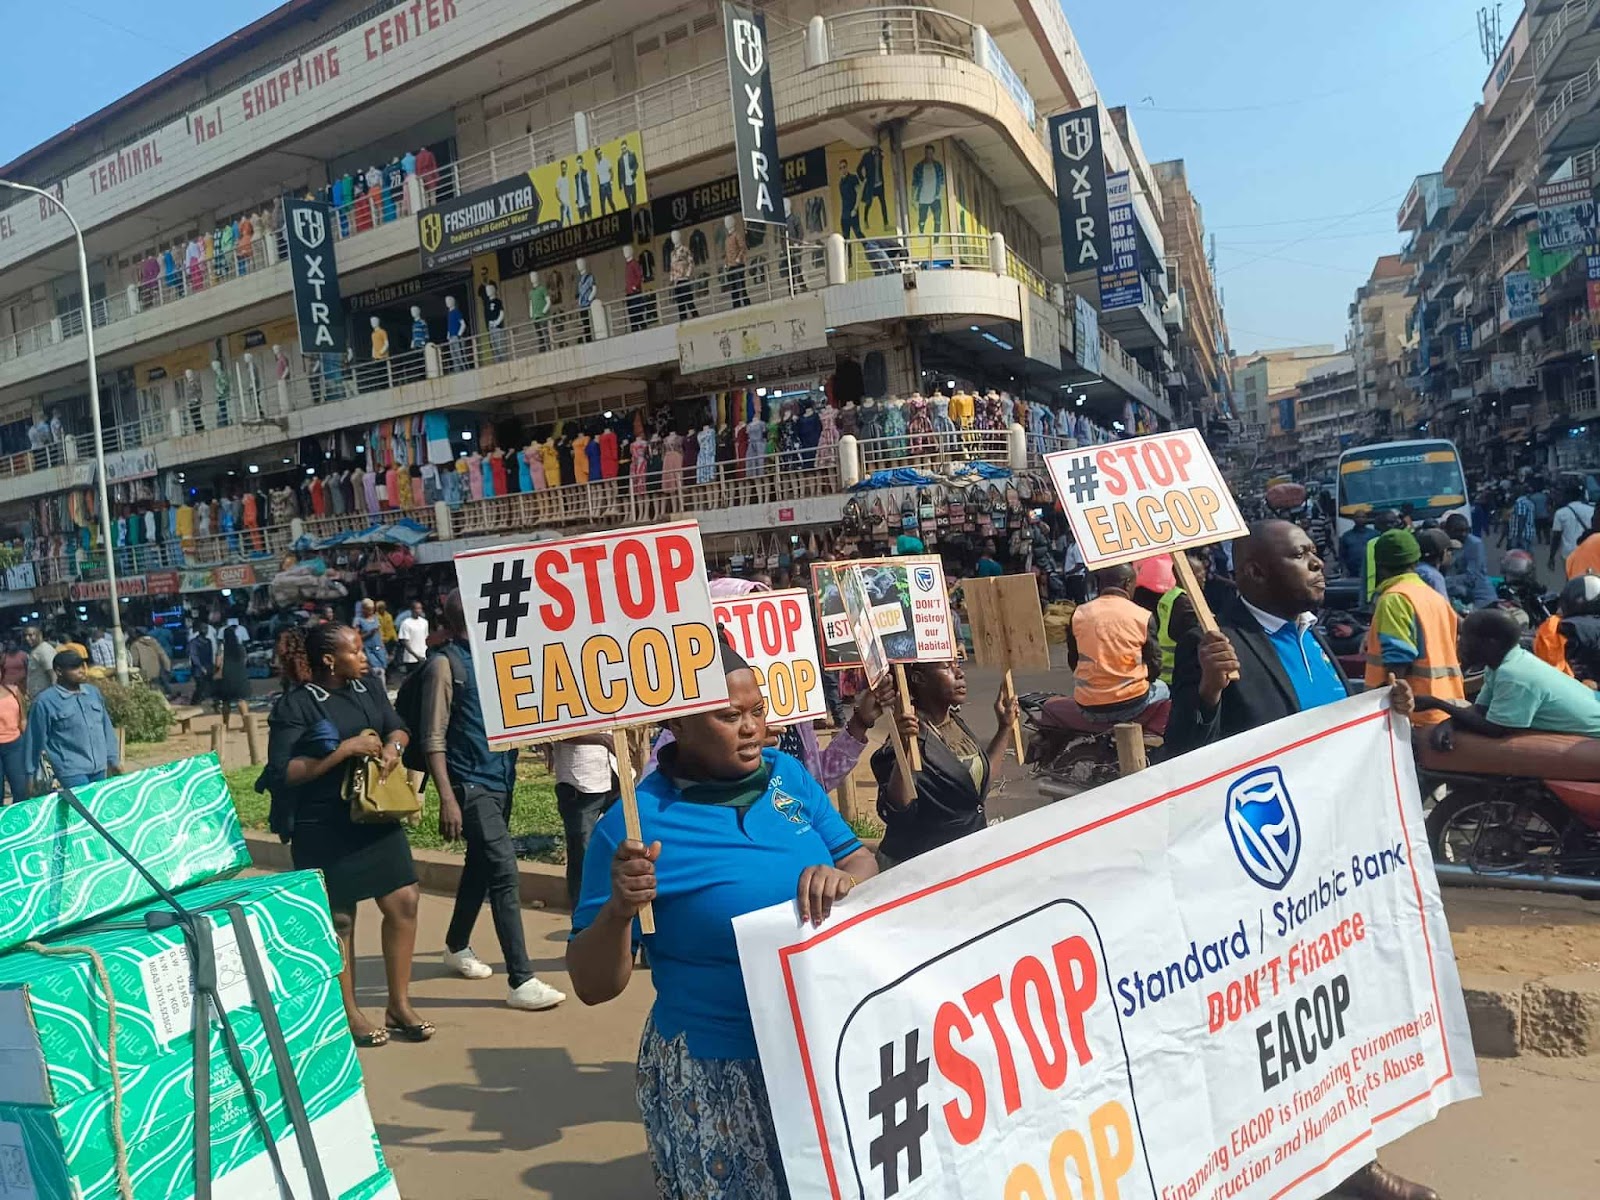 A rally through a busy city with lots of Stop EACOP banners and signs